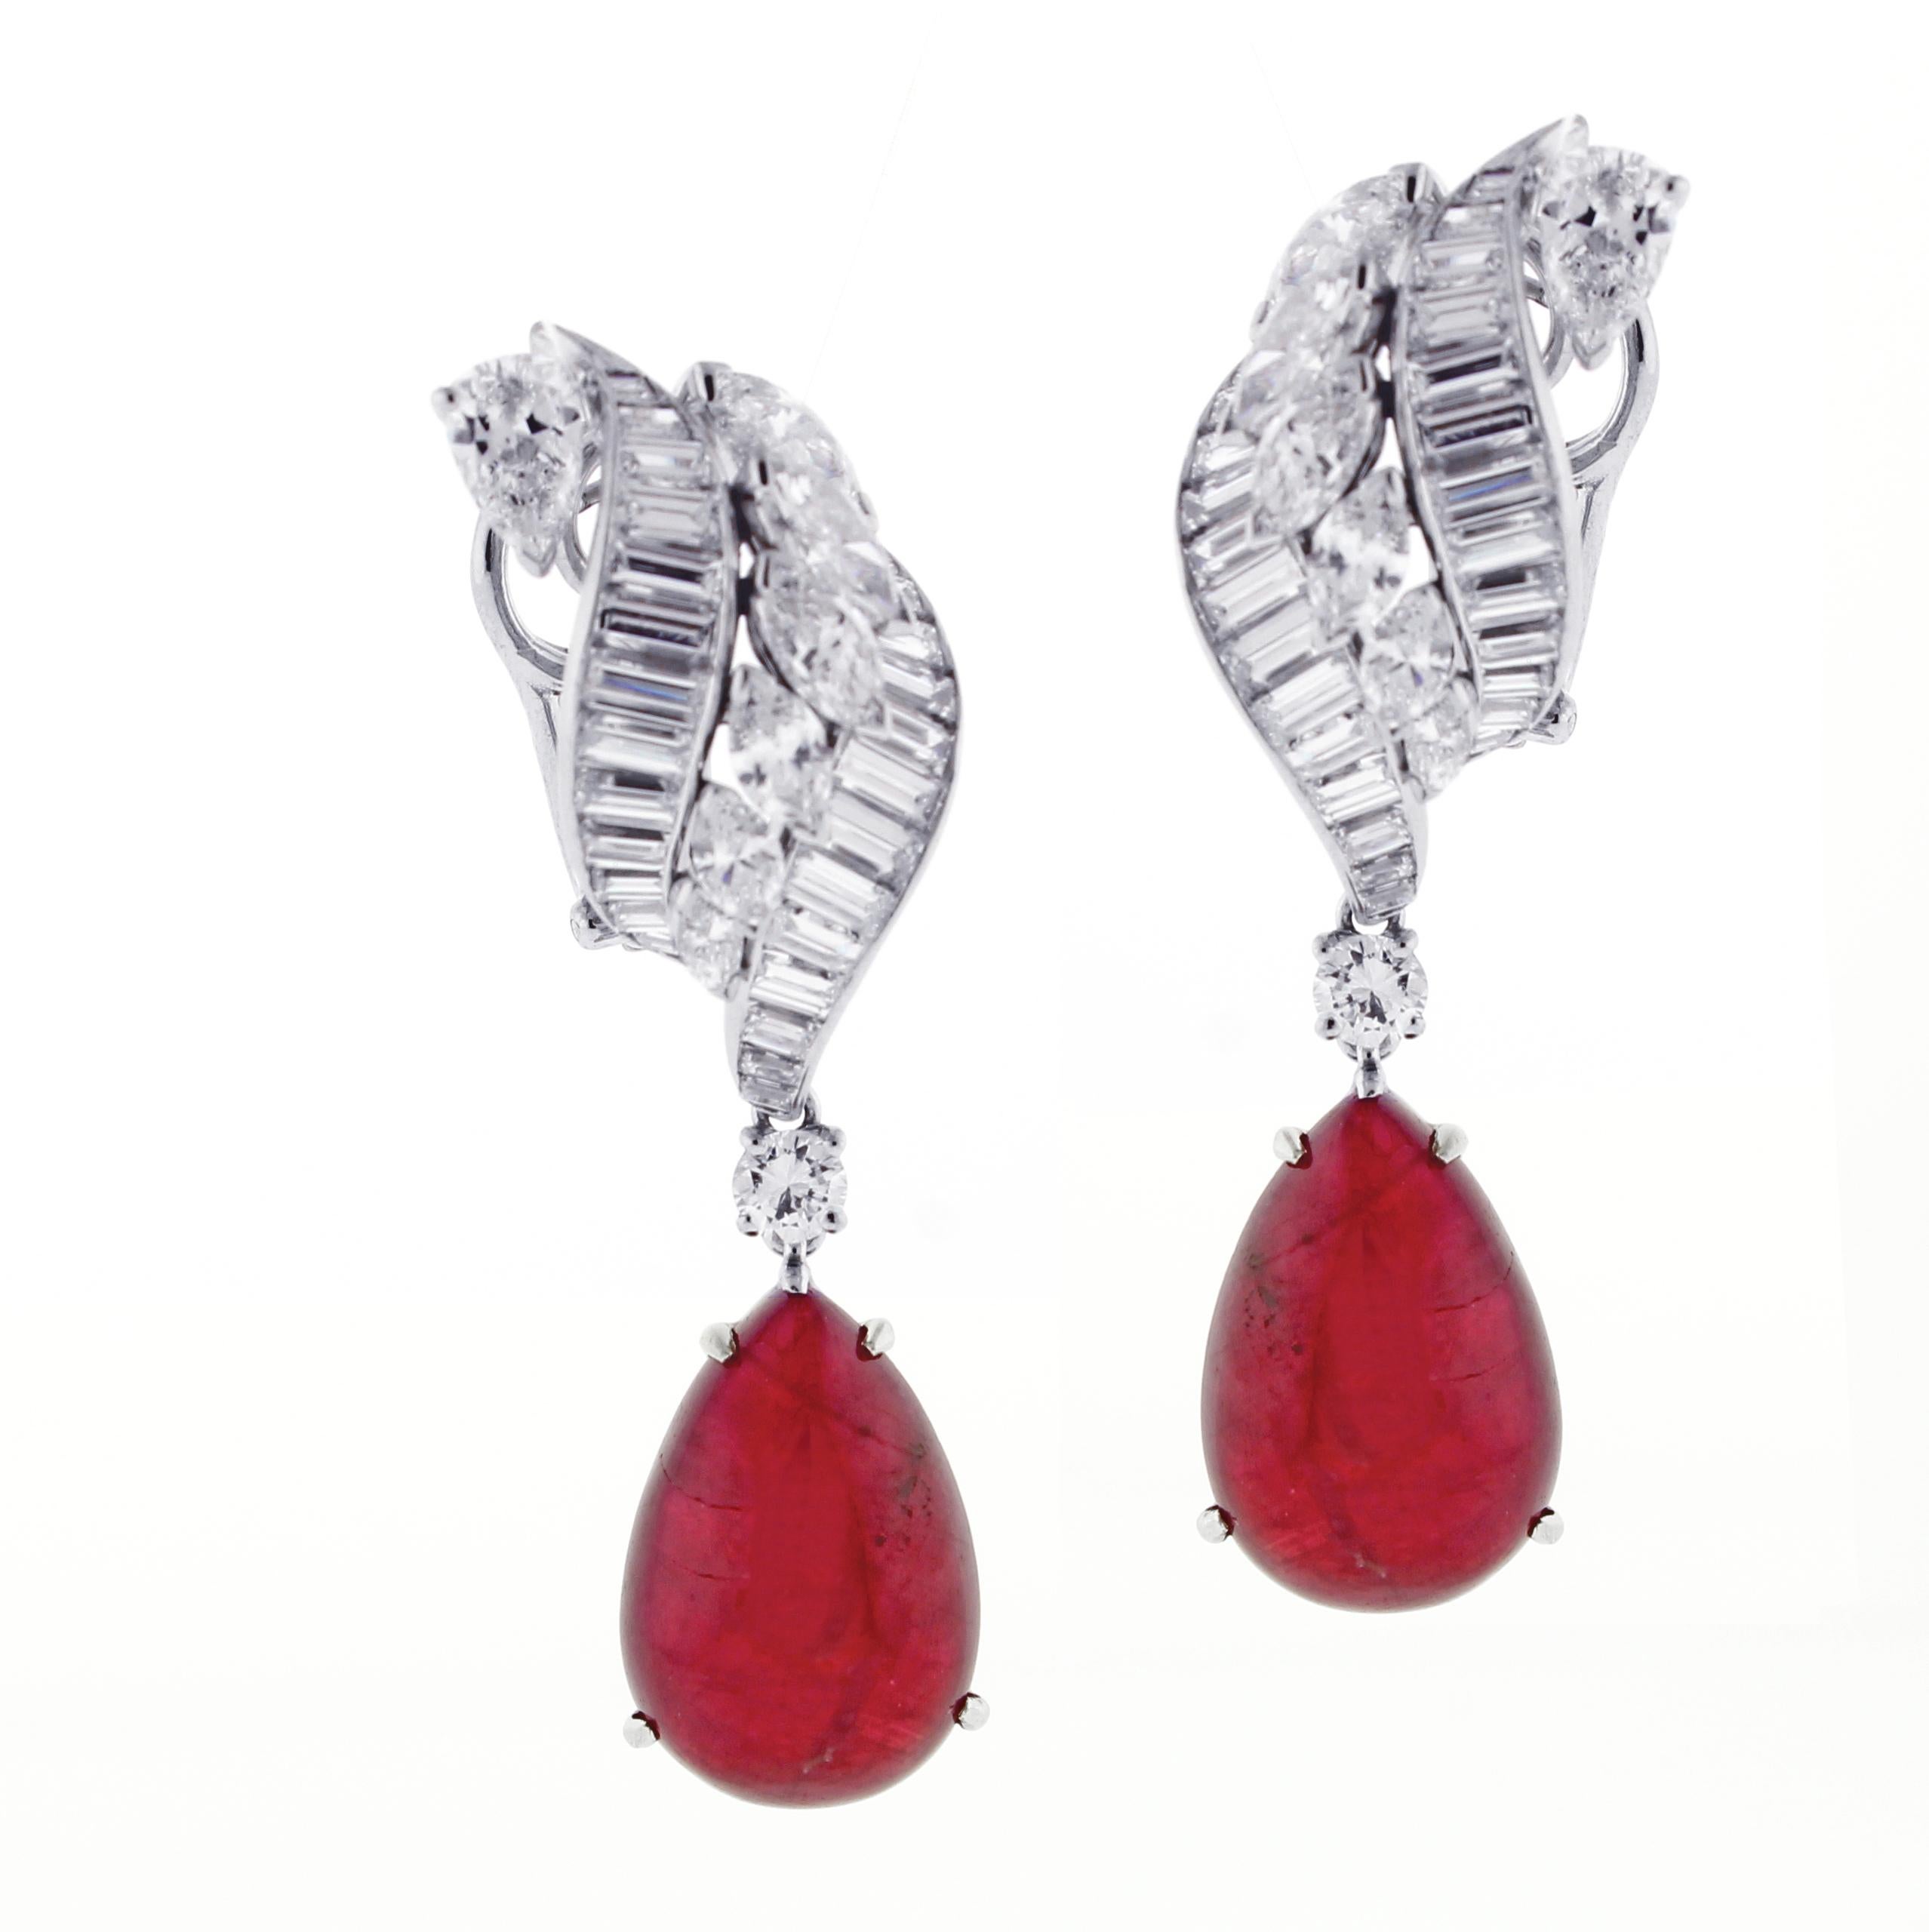 From Hammerman Brothers,  a pair of pear shape cabochon ruby and diamond drop earrings.
♦ Designer:  Hammerman Brothers 
♦ Metal: Platinum with 18kt white gold clips
♦ 2 cabochon rubies 20 carats
♦ 52 Baguette diamonds=2.50, 12 Marquise diamonds=2